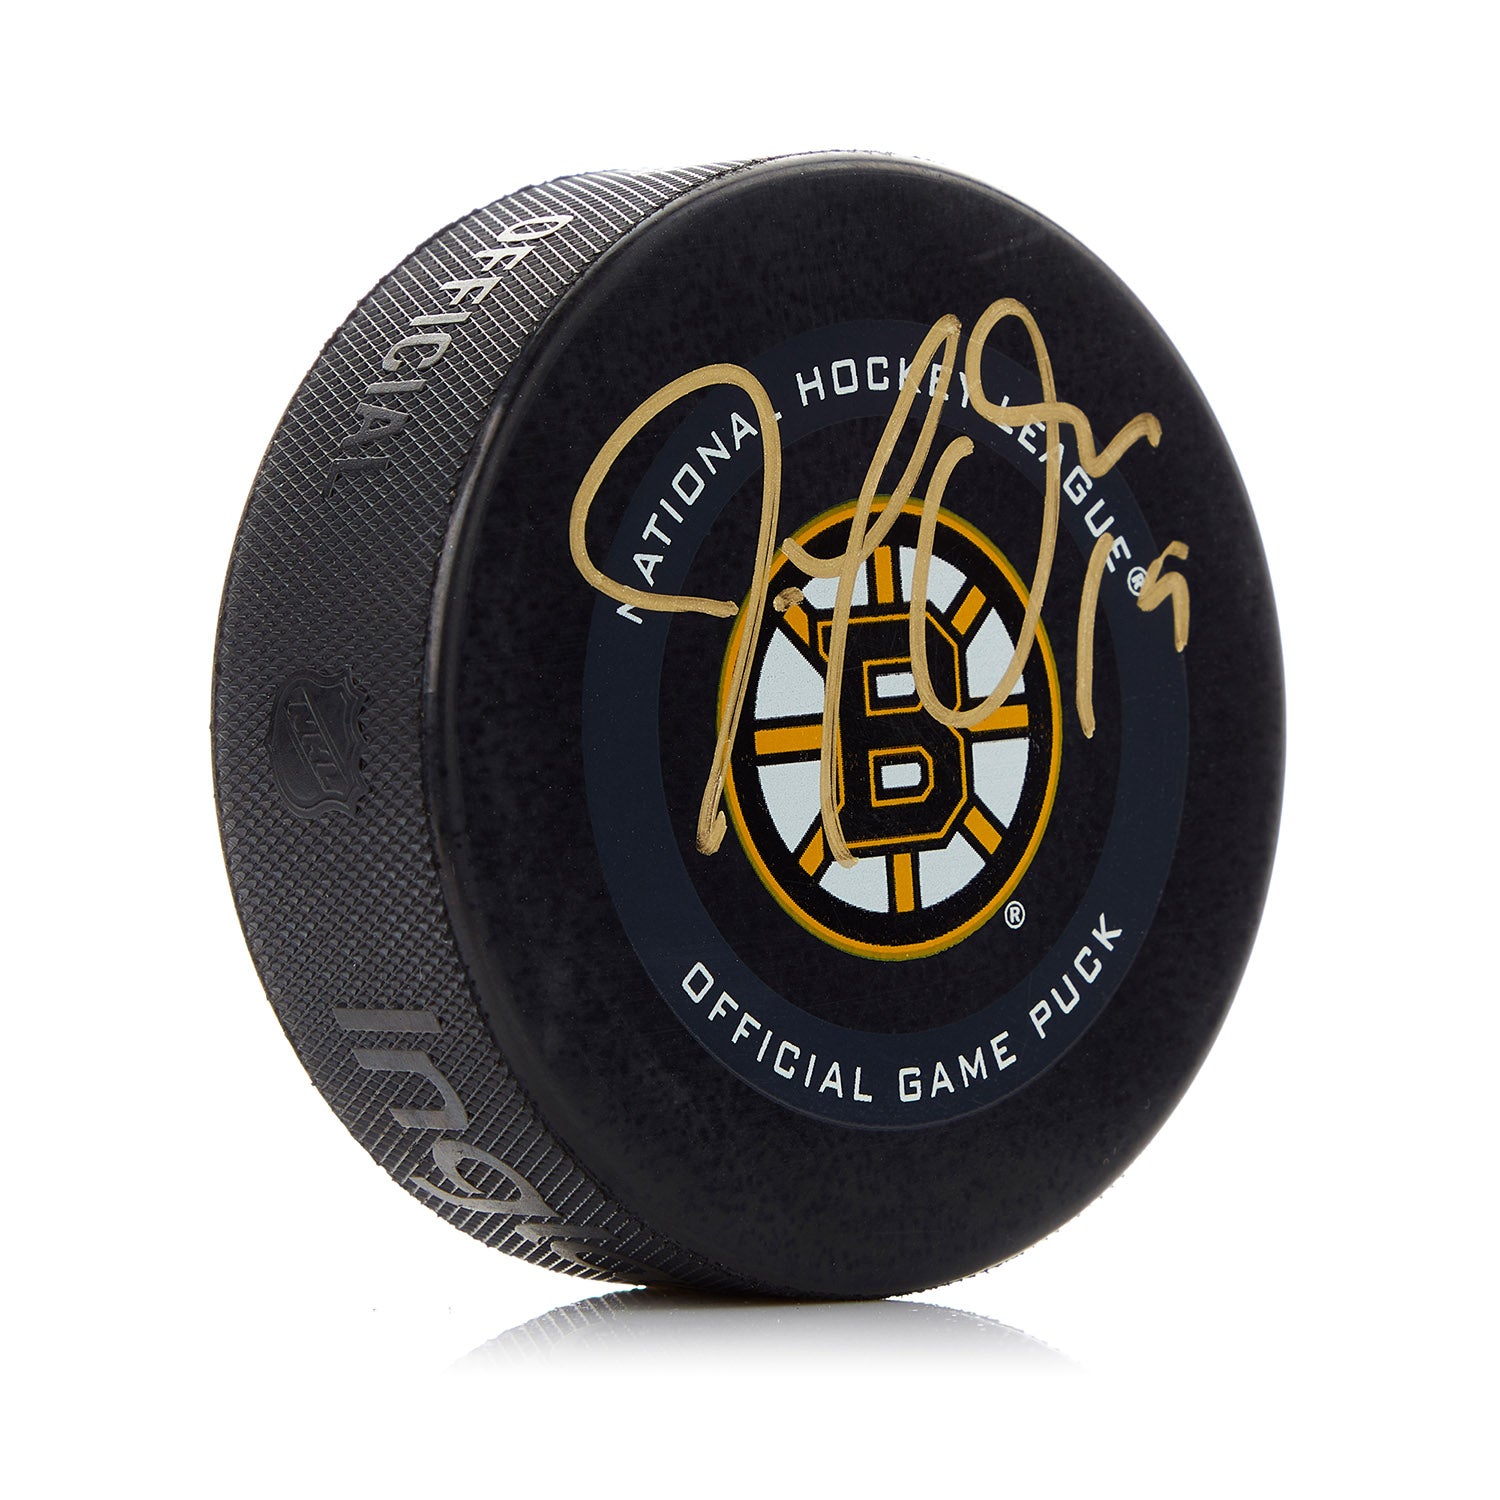 Joe Thornton Boston Bruins Signed Official Game Puck